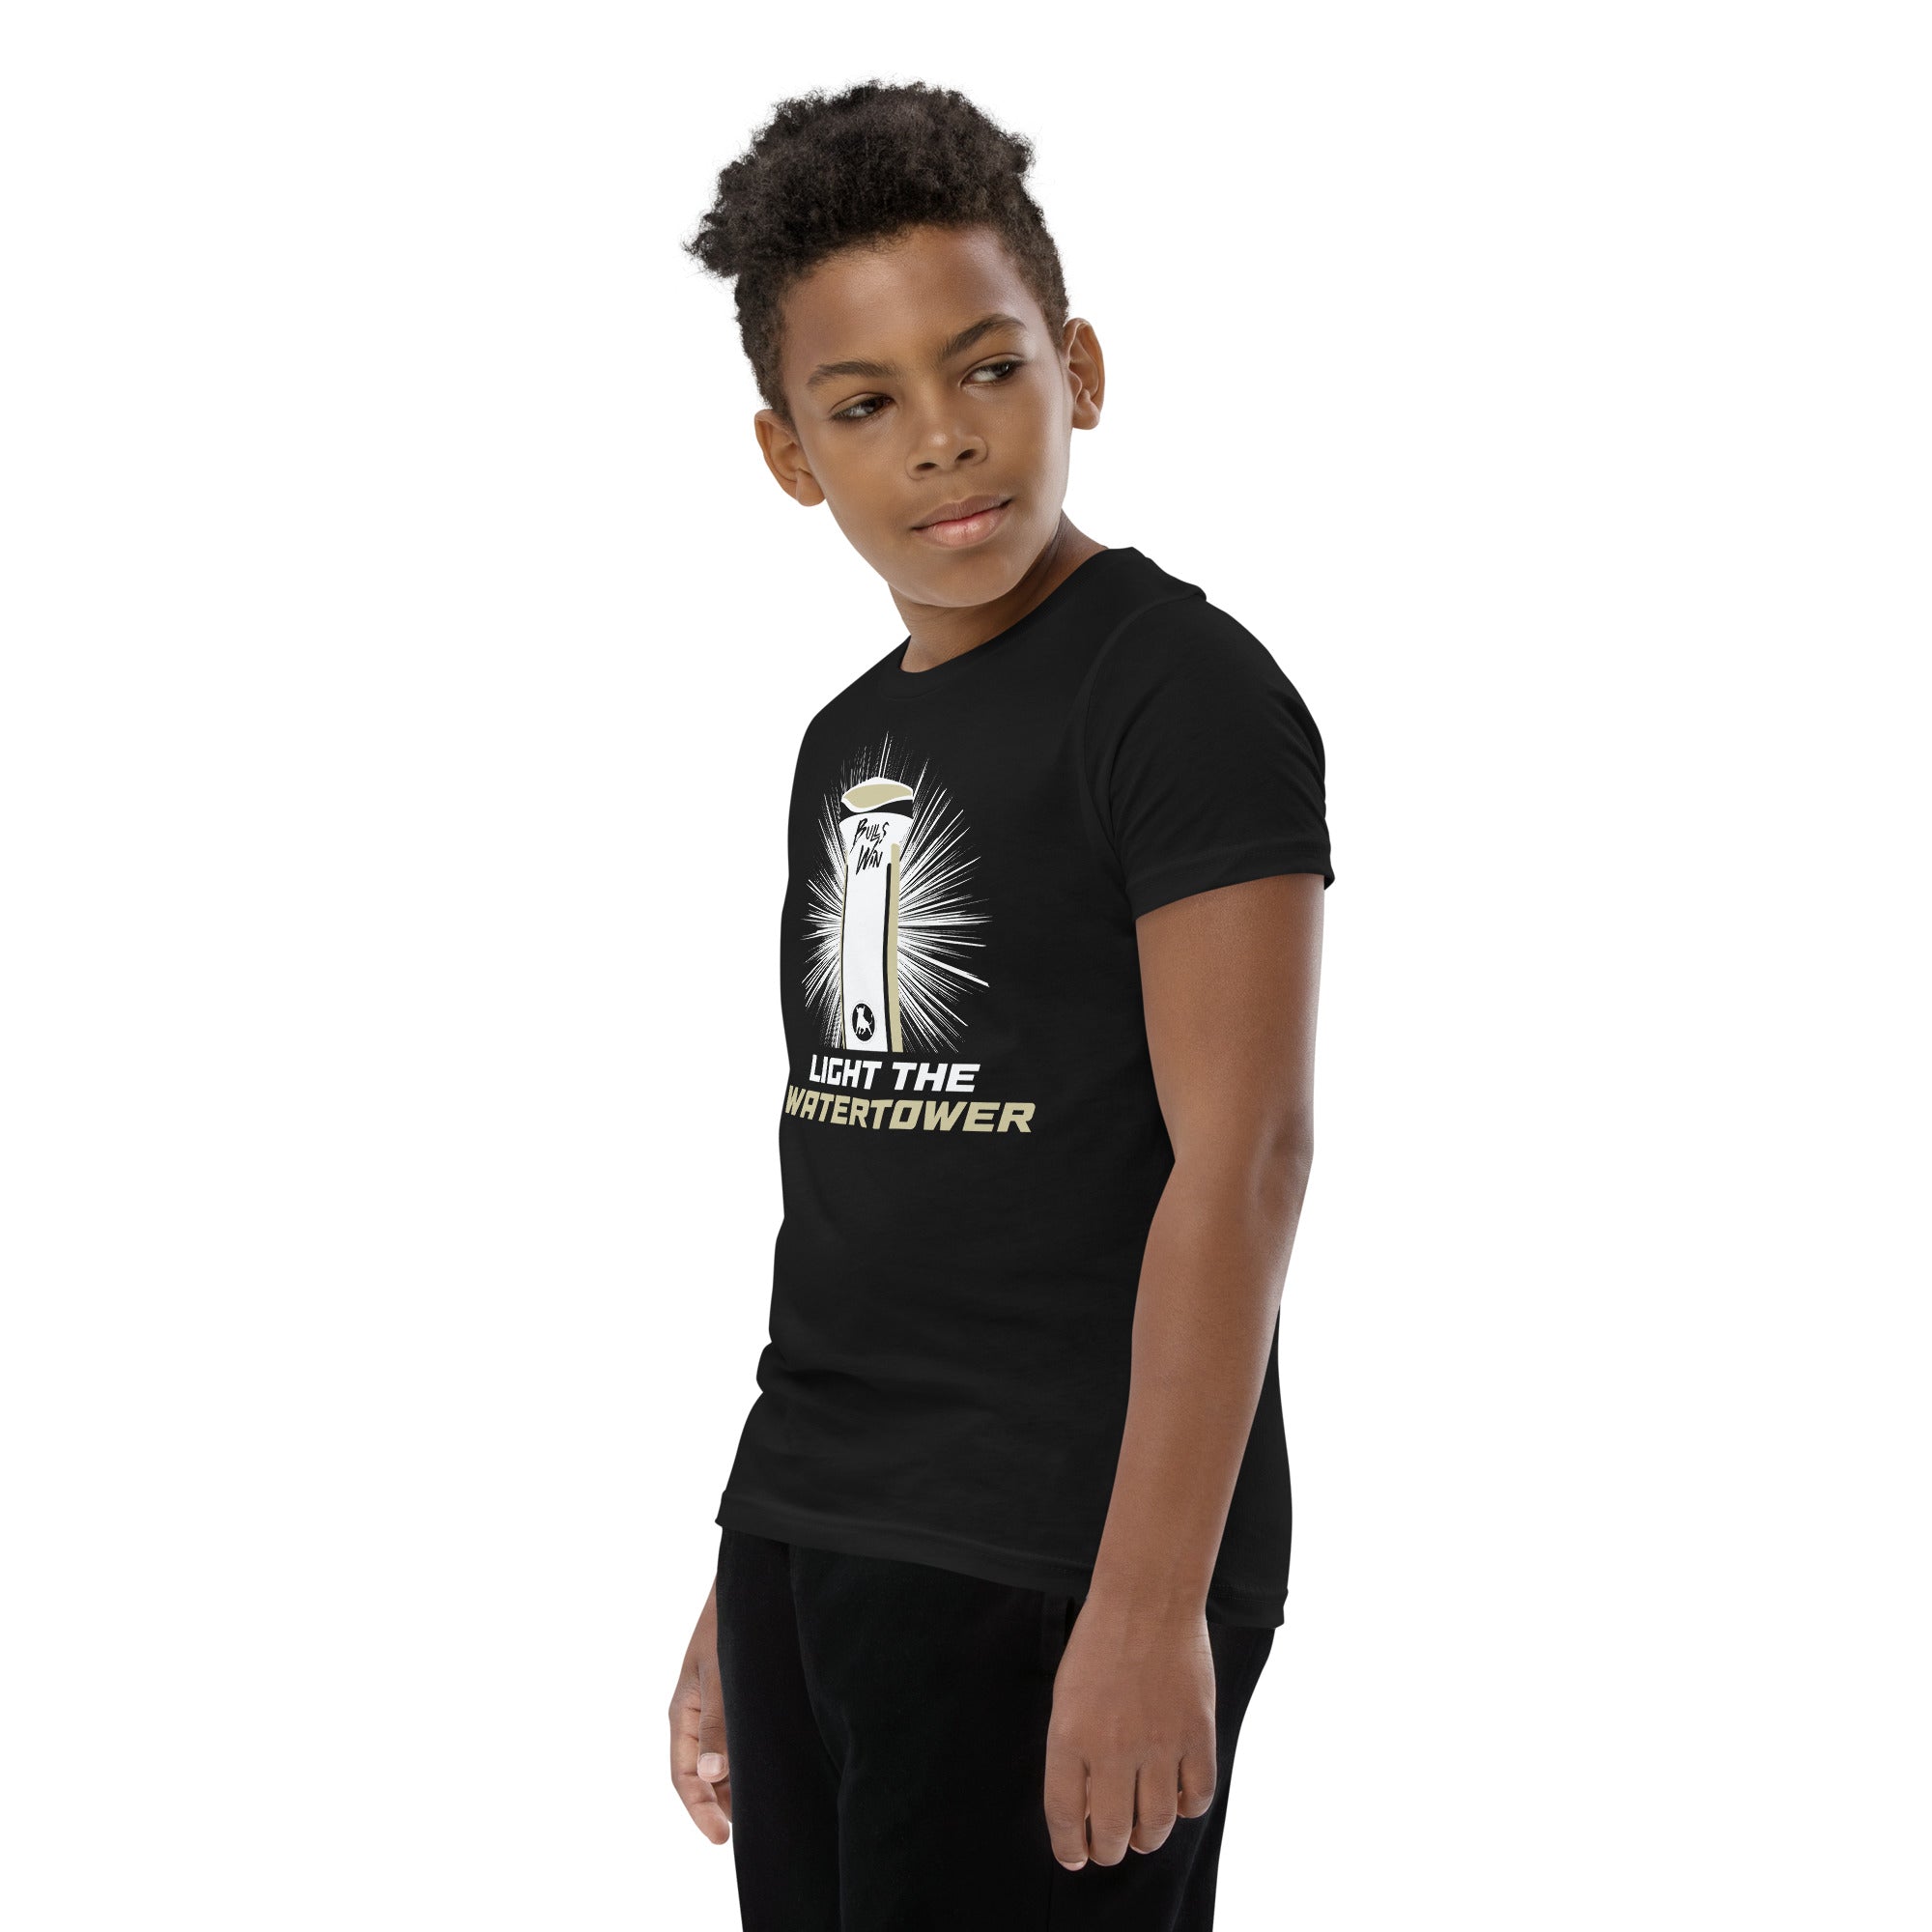 Light the Watertower - Youth Short Sleeve T-Shirt